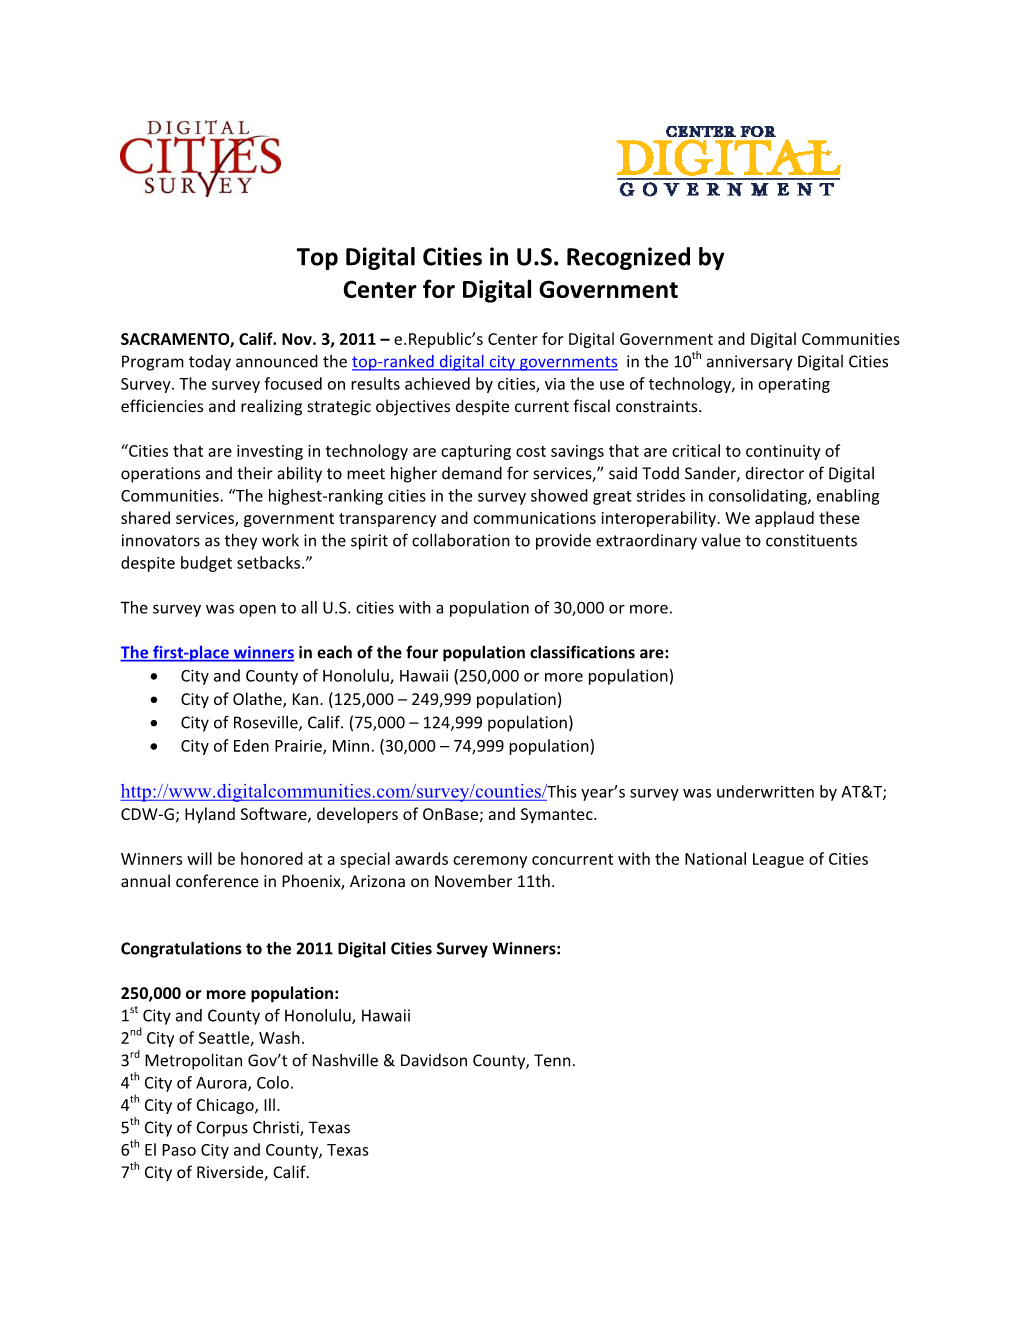 Top Digital Cities in U.S. Recognized by Center for Digital Government